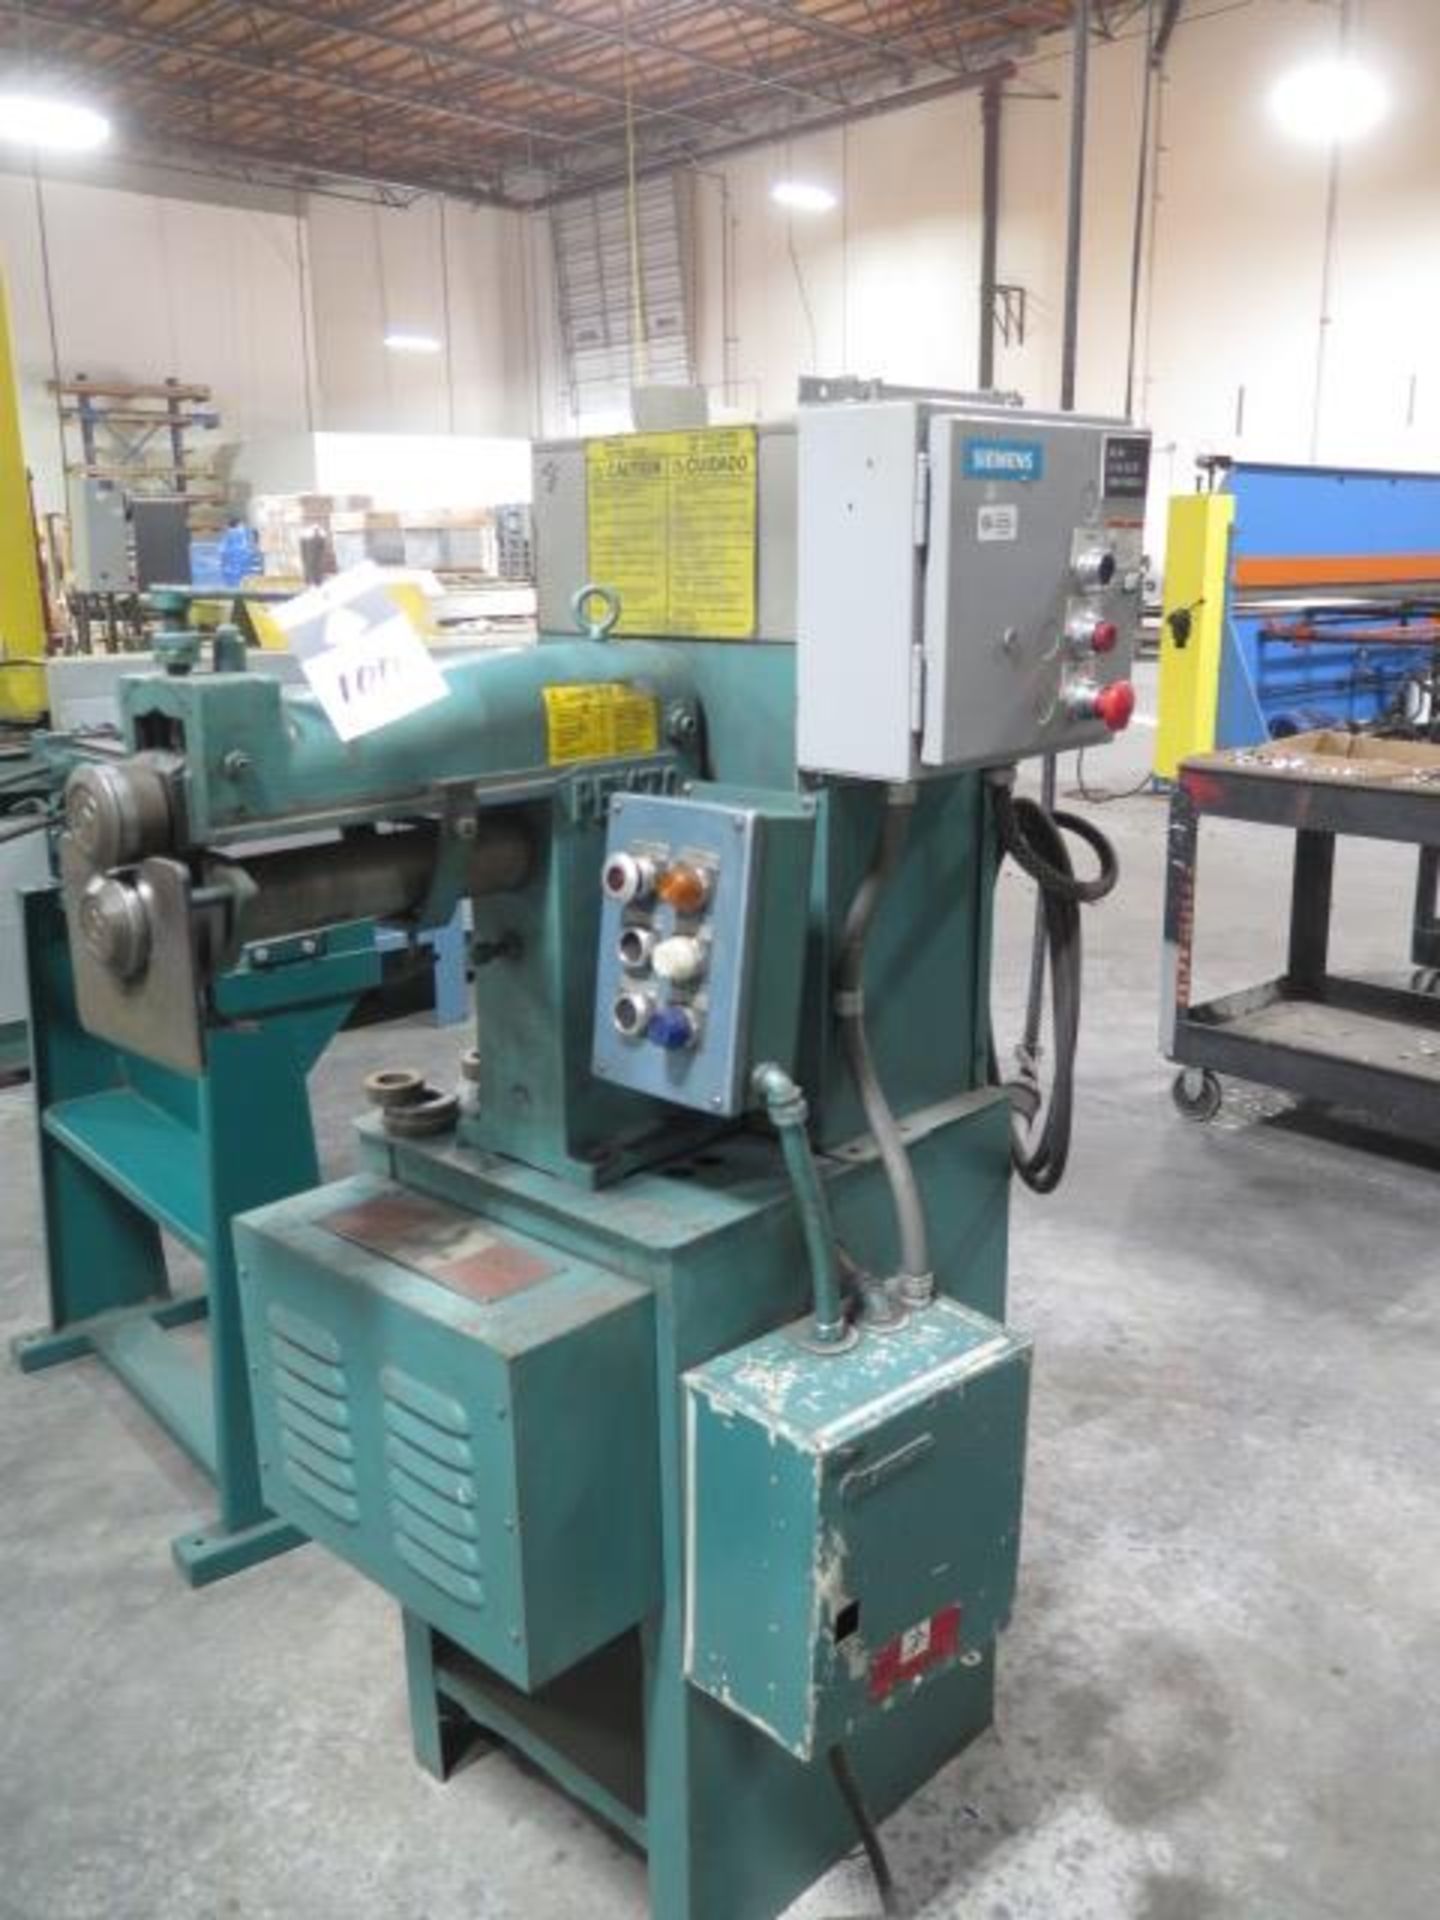 Pexto mdl. 3617 Power Beading/Crimping Machine s/n 1033-2-02 w/ 12" Throat, SOLD AS IS - Image 2 of 8